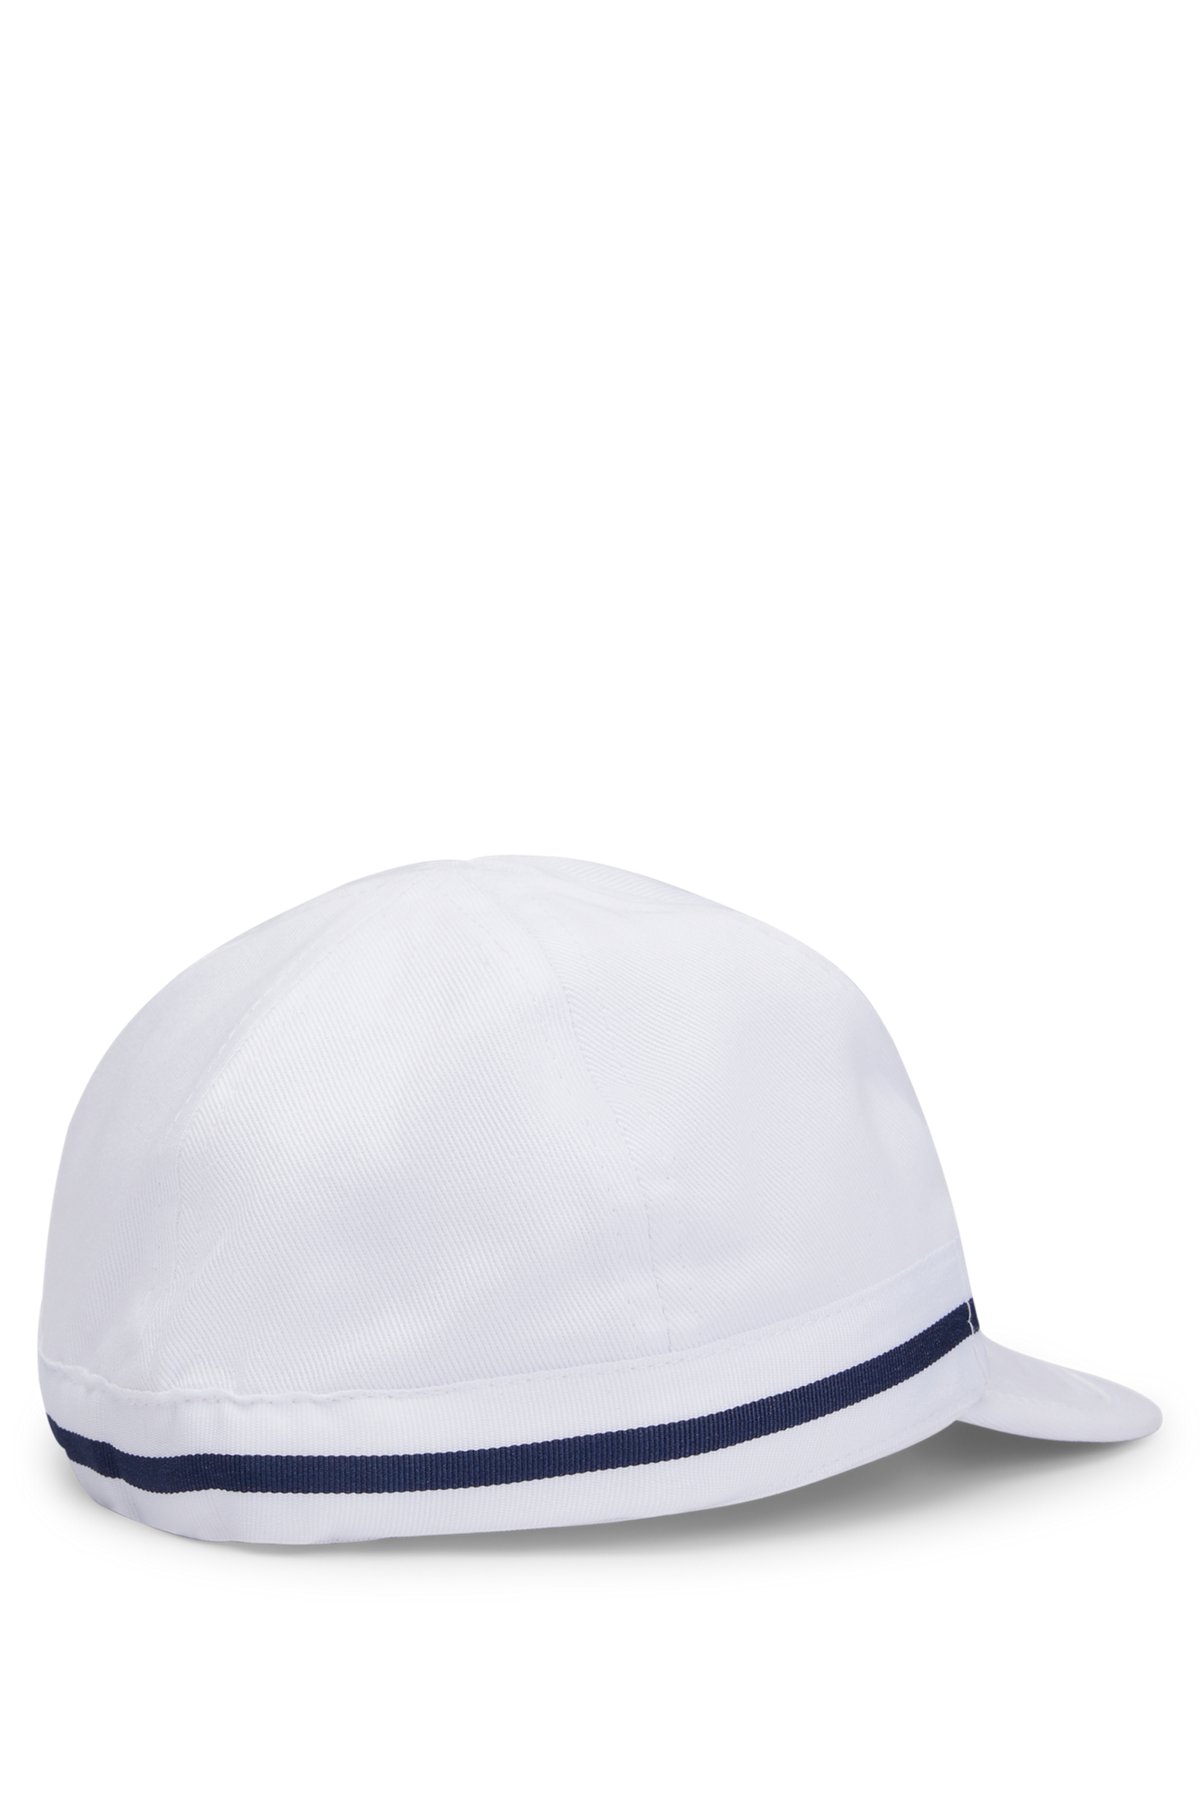 Baby cap in cotton with logo label, White